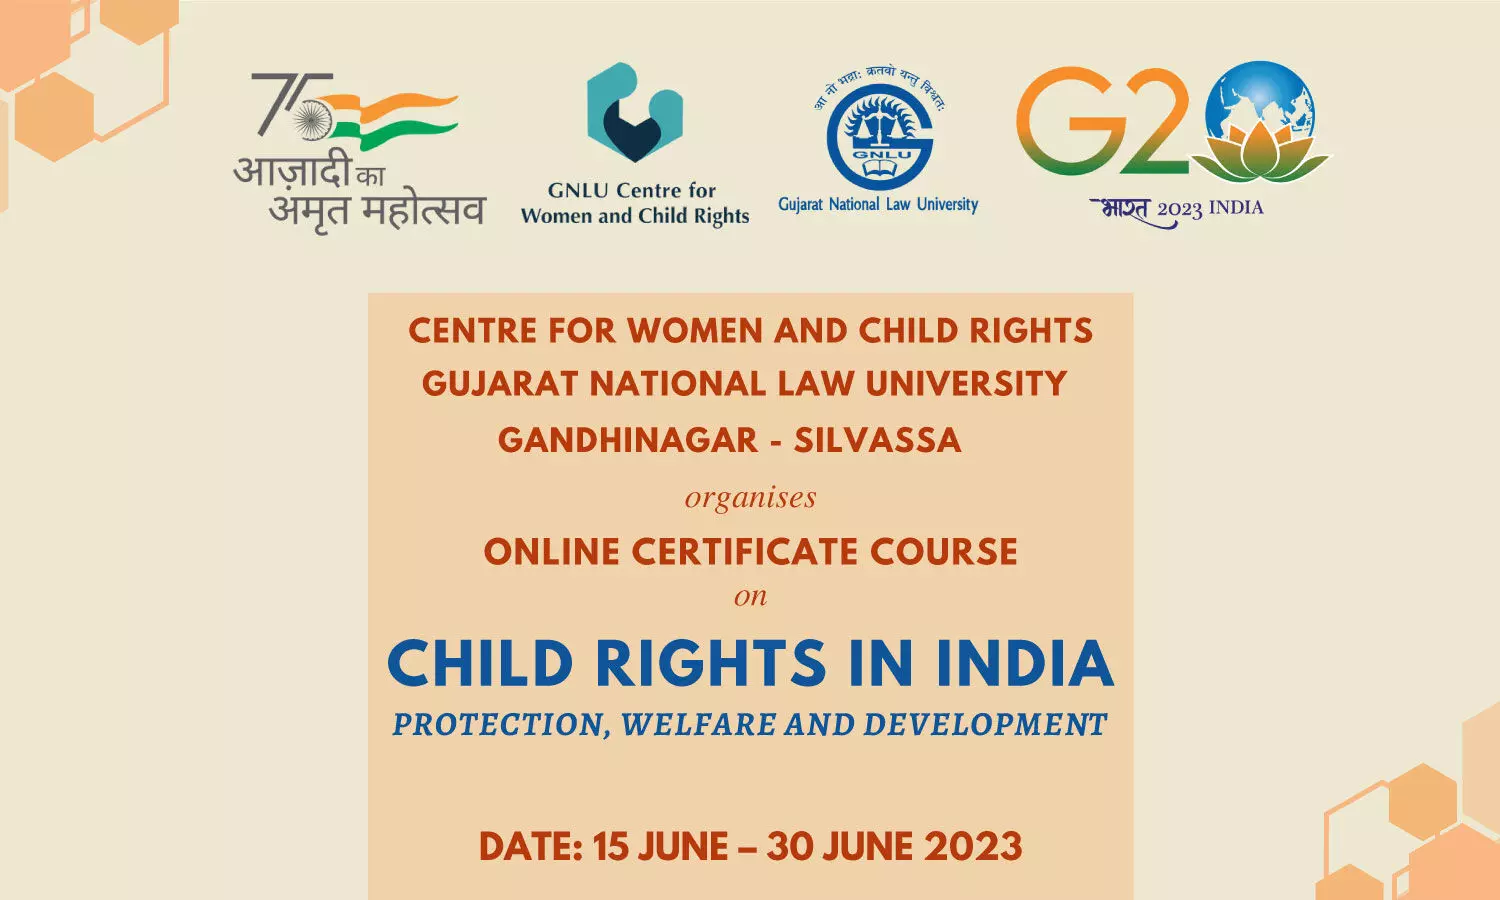 Online Certificate Course on Child Rights in India | GNLU Centre for Women and Child Rights